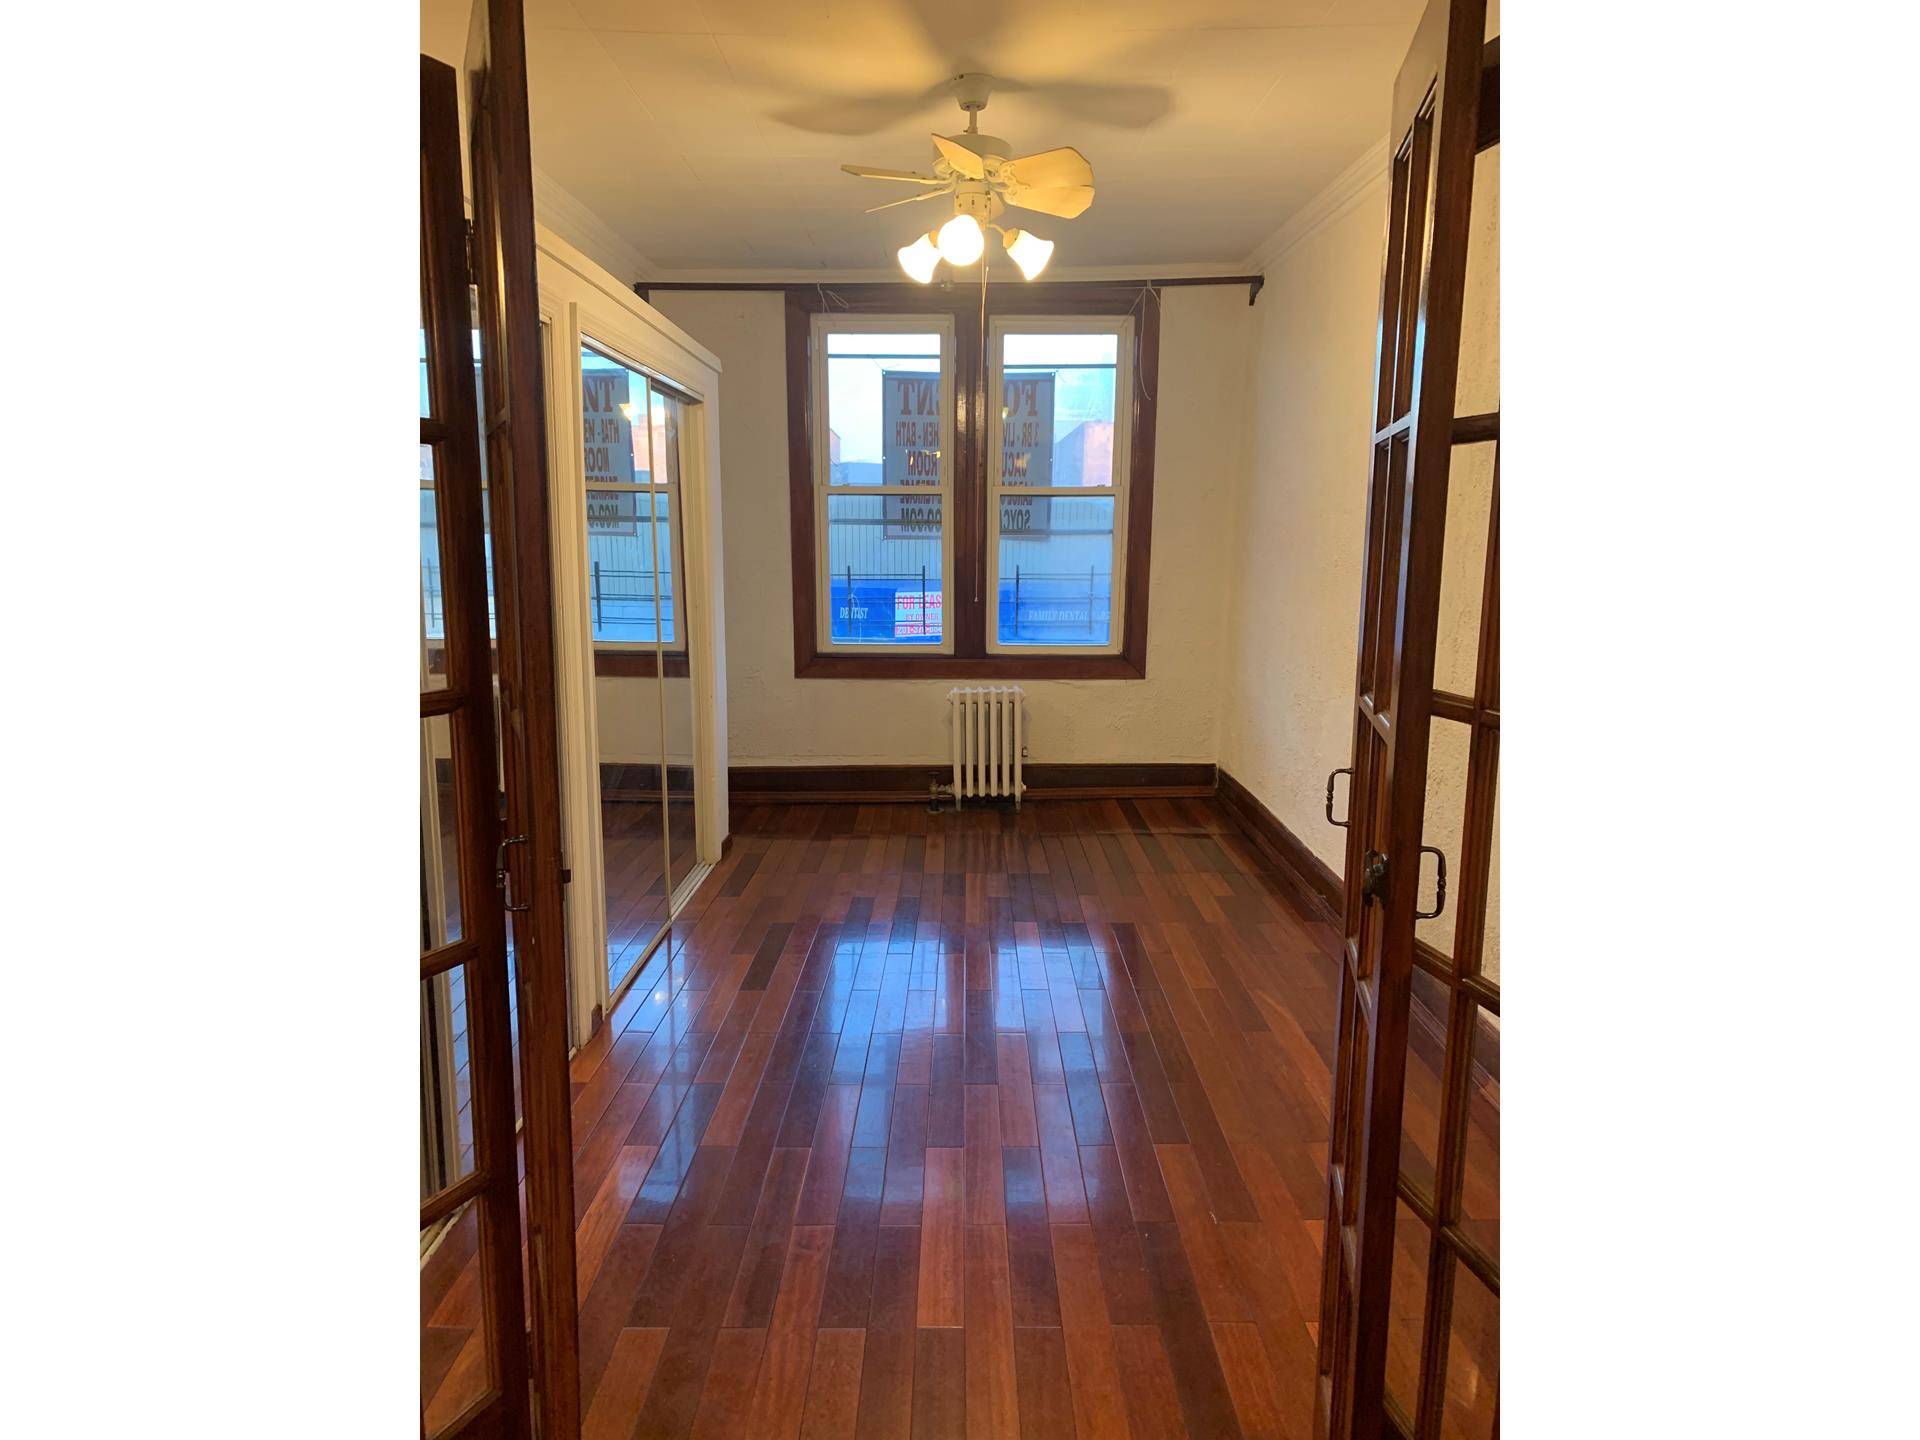 Beautifully renovated extra large pet friendly 3 bedroom apartment with JACUZZI and LARGE PATIO located in the heart of Jackson Heights !